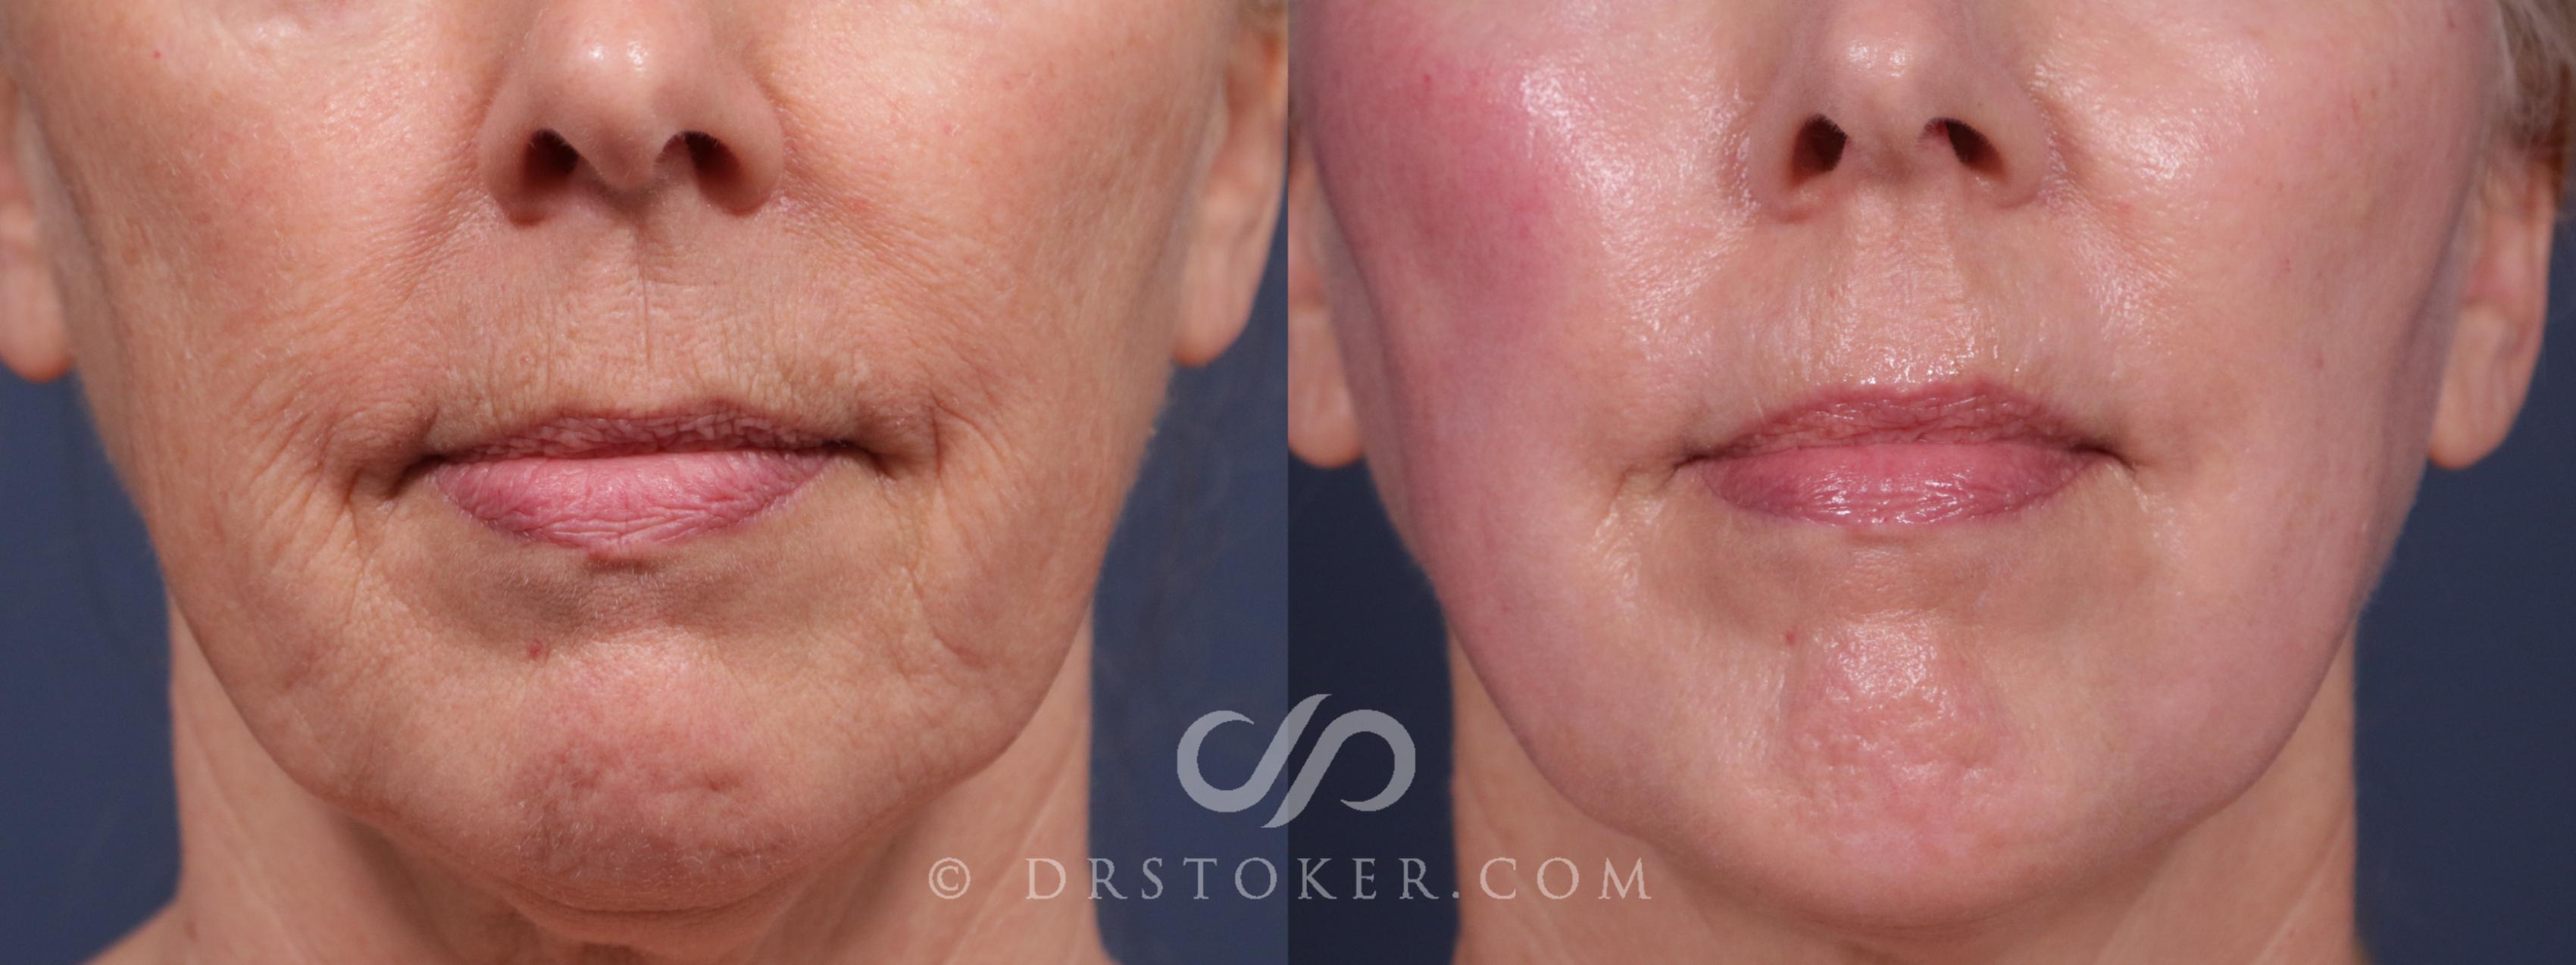 Before & After Laser Skin Resurfacing (Mouth) Case 2189 Front View in Los Angeles, CA